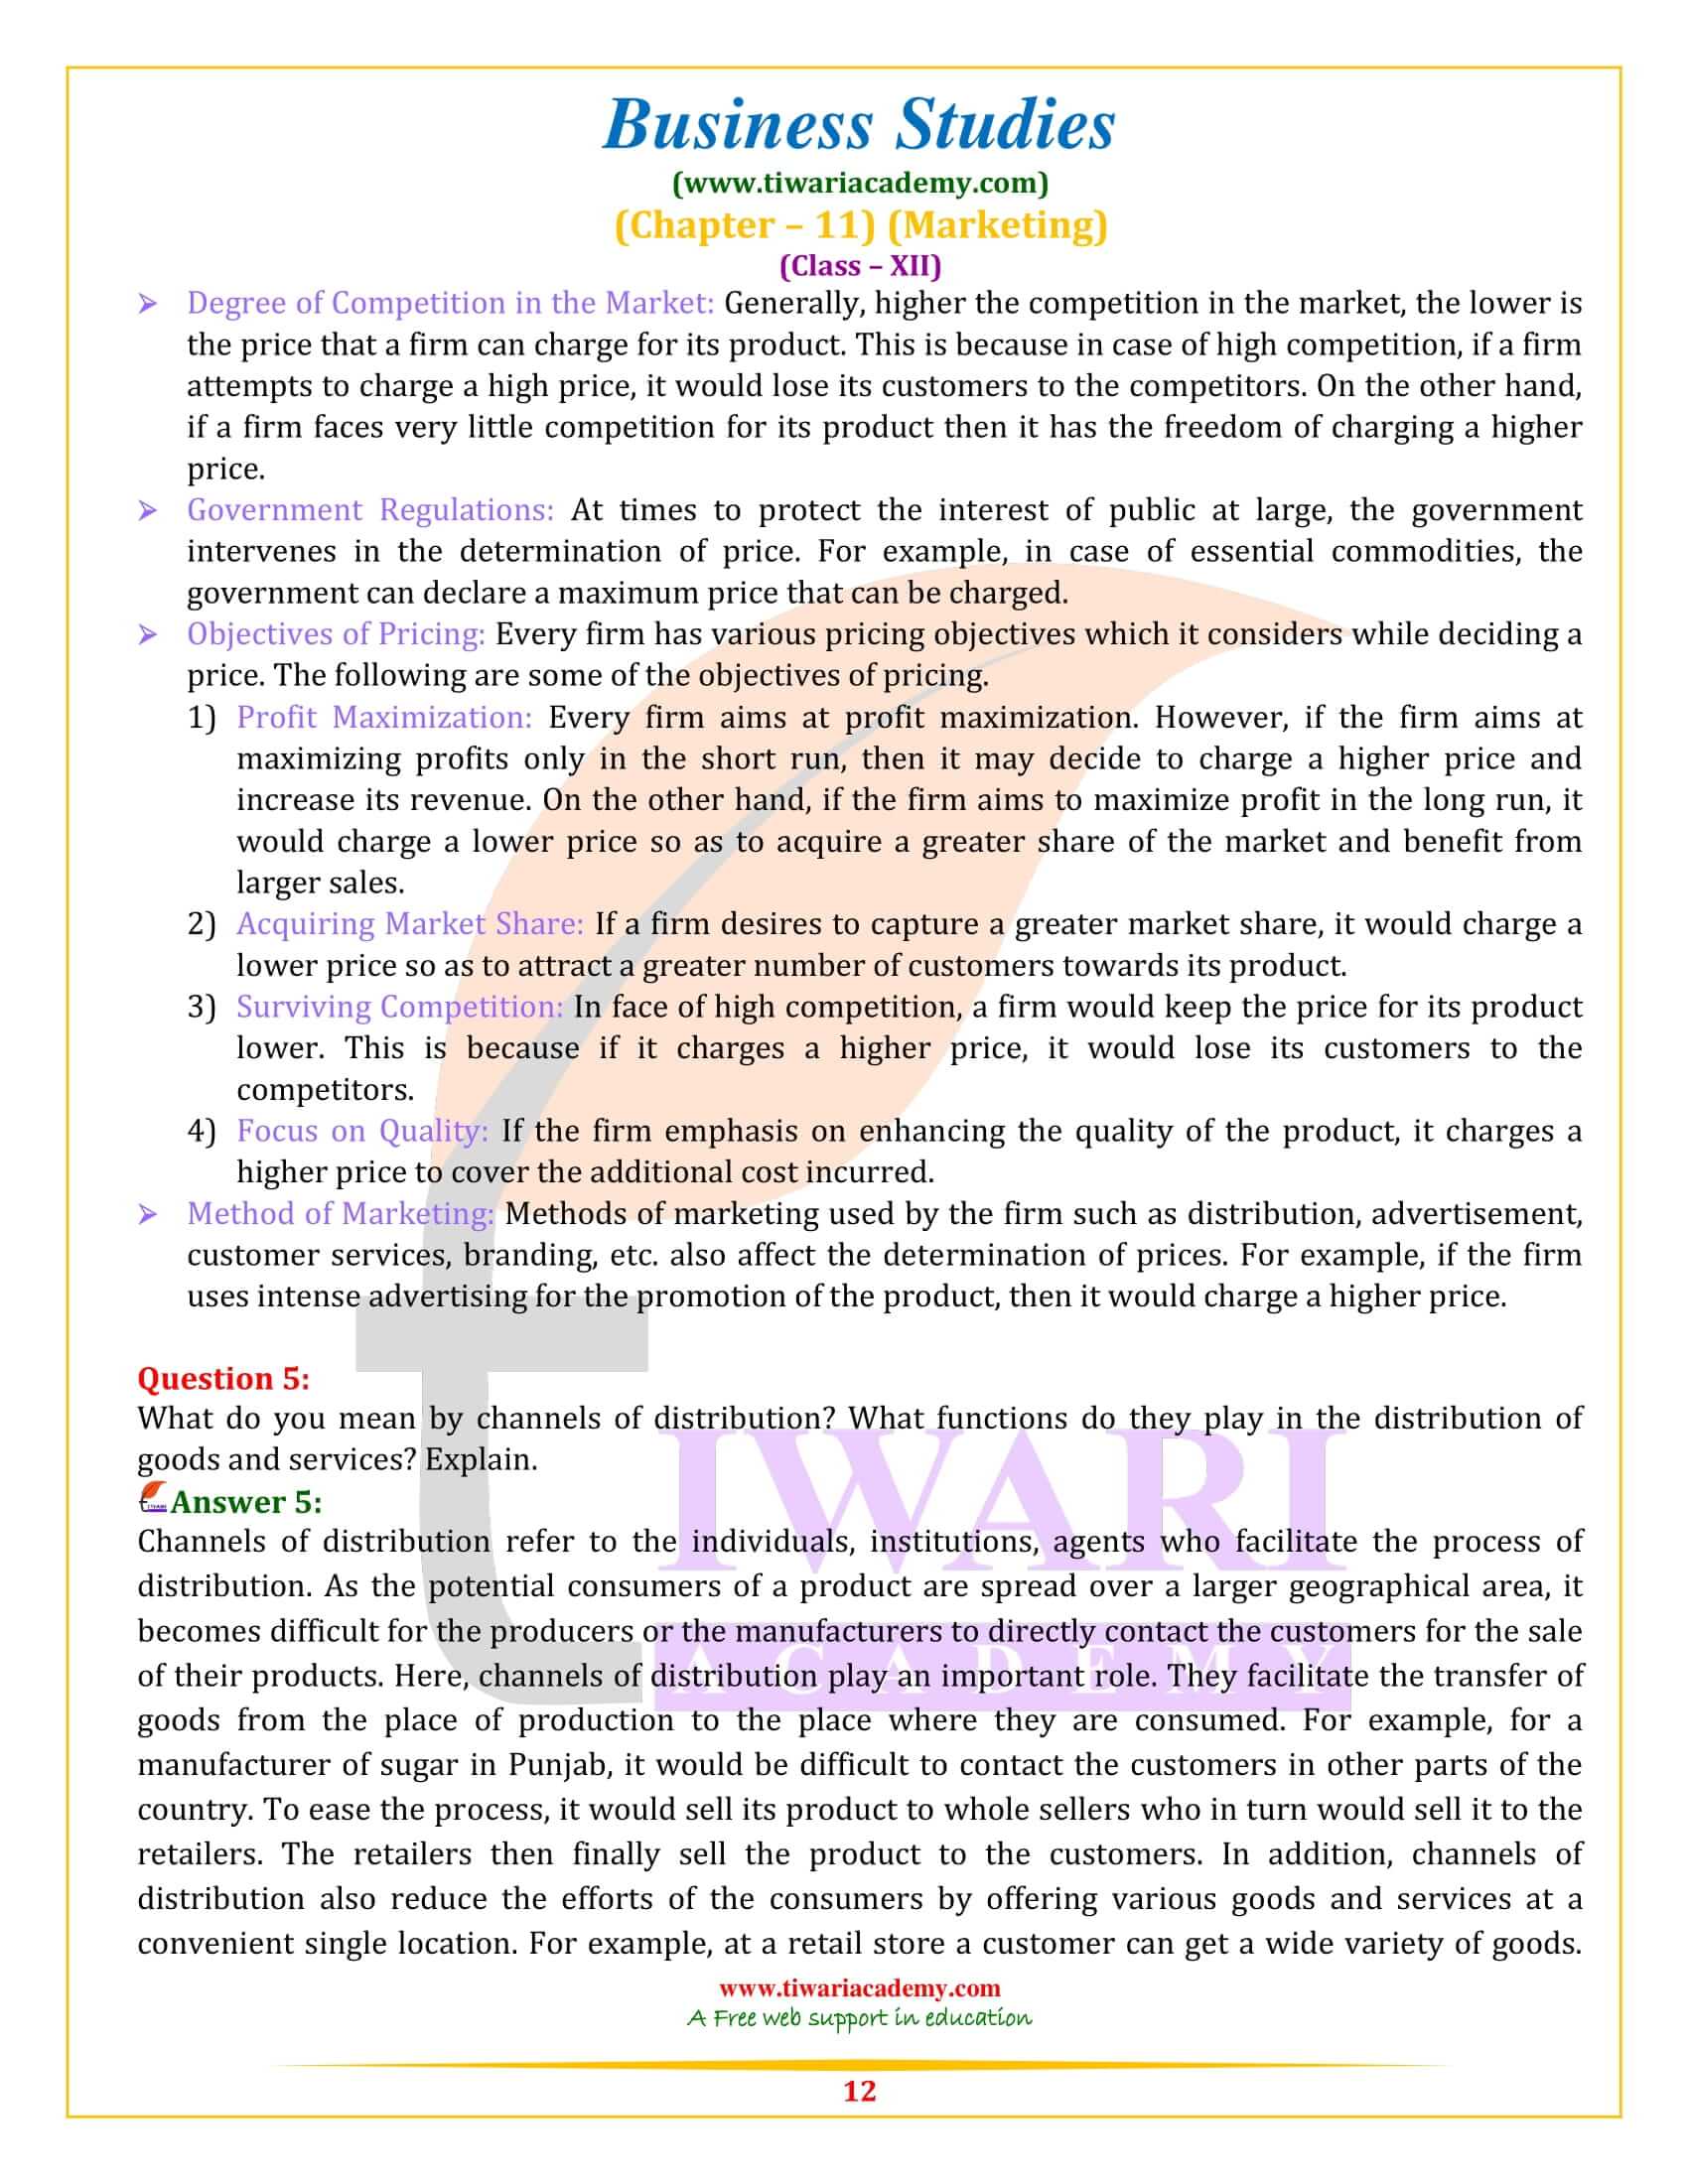 NCERT Solutions for Class 12 Business Studies Chapter 11 all answers